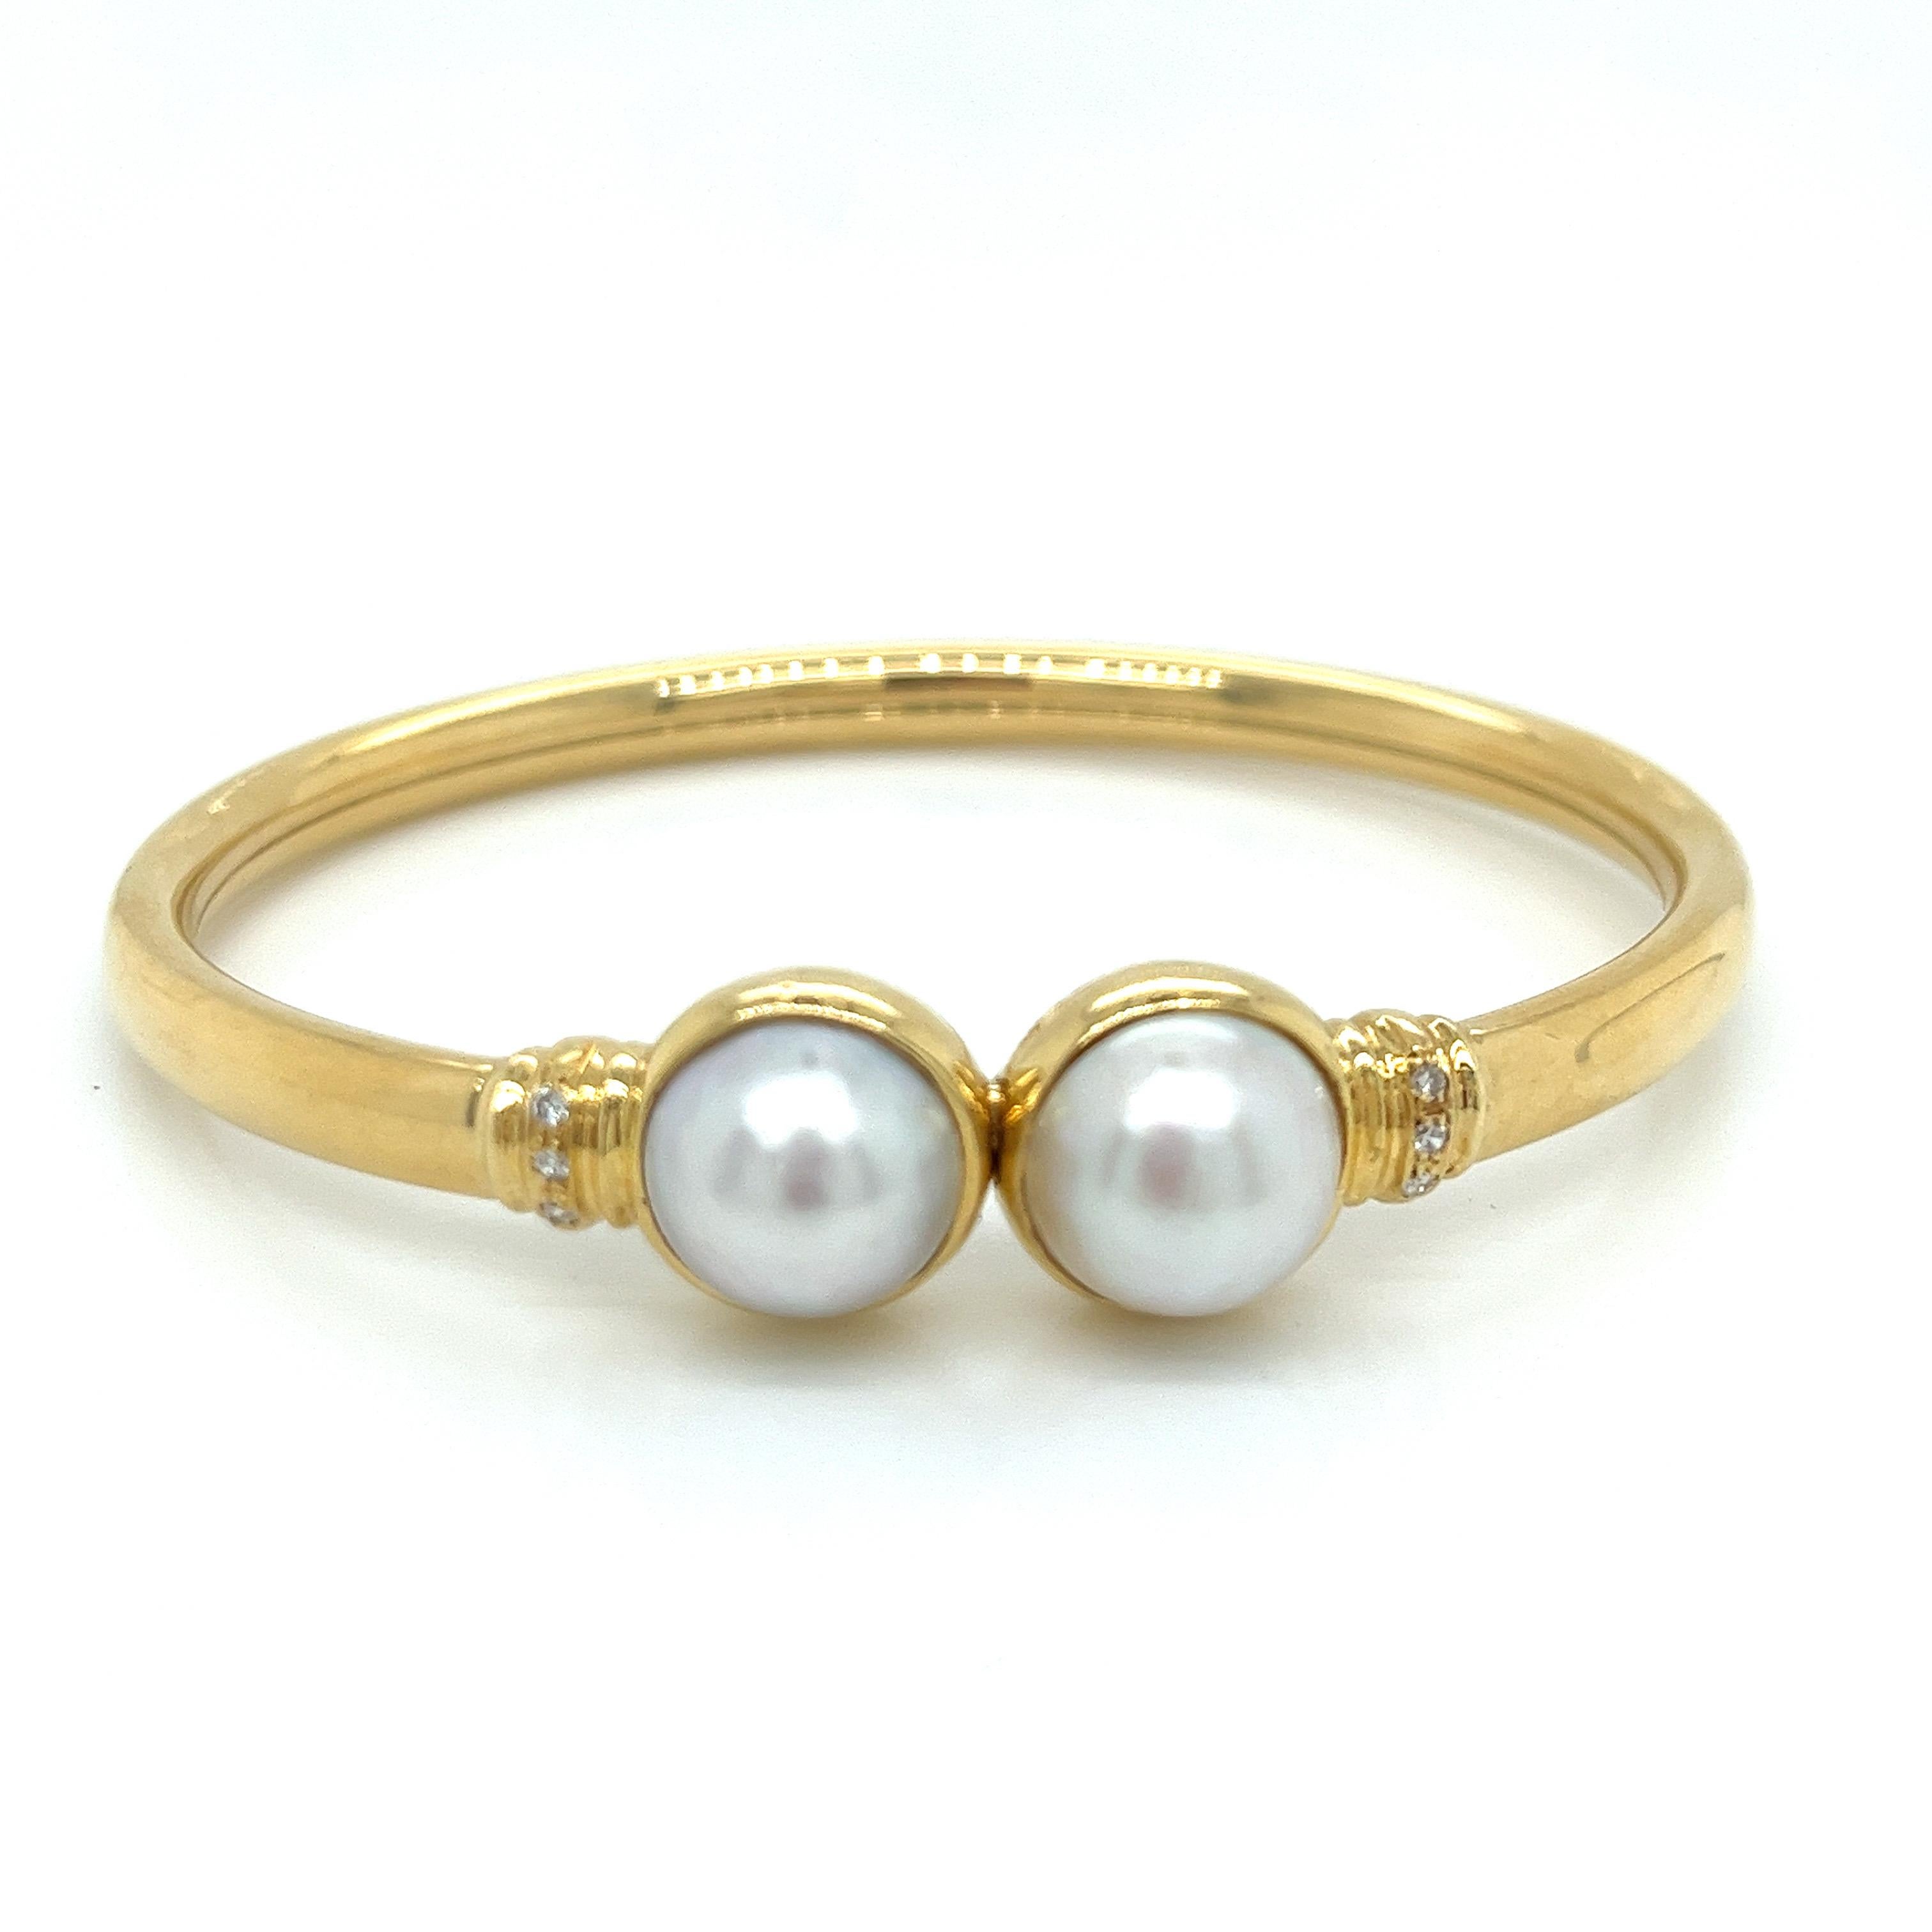 Vintage 18k Yellow Gold Mabe Pearl and Diamond Bangle Bracelet - The two Mabe pearls measure 10mm in diameter. They are set in bezels that click together. The bangle has 6 accent round diamonds that weigh appr. .06ct. The width of the bangle is 4mm